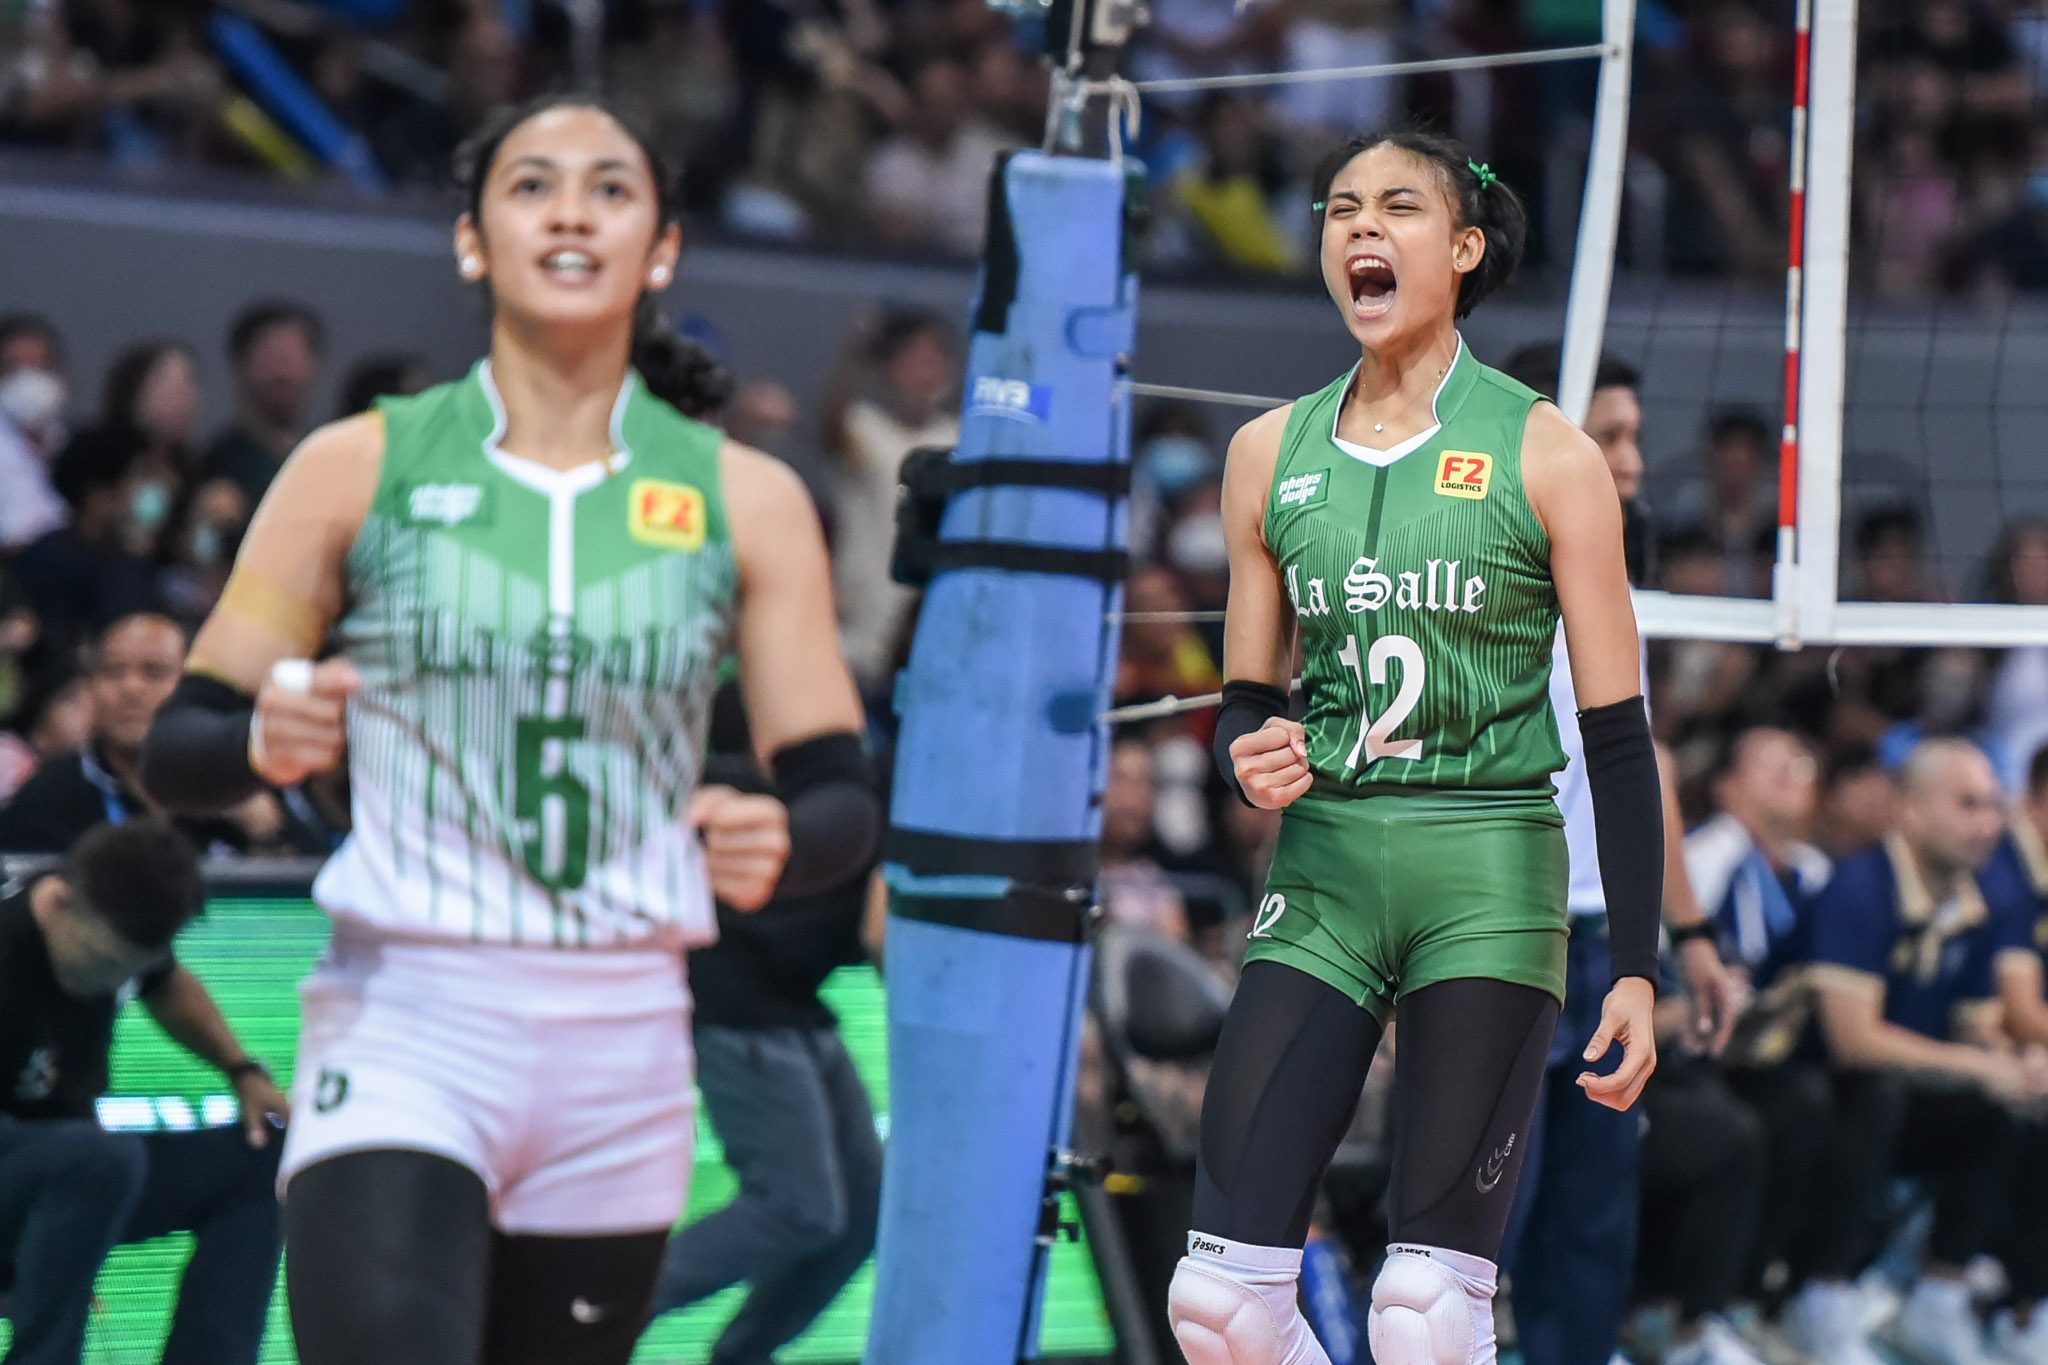 La Salle caps off dominant Season 85 with reverse sweep of NU for 12th title